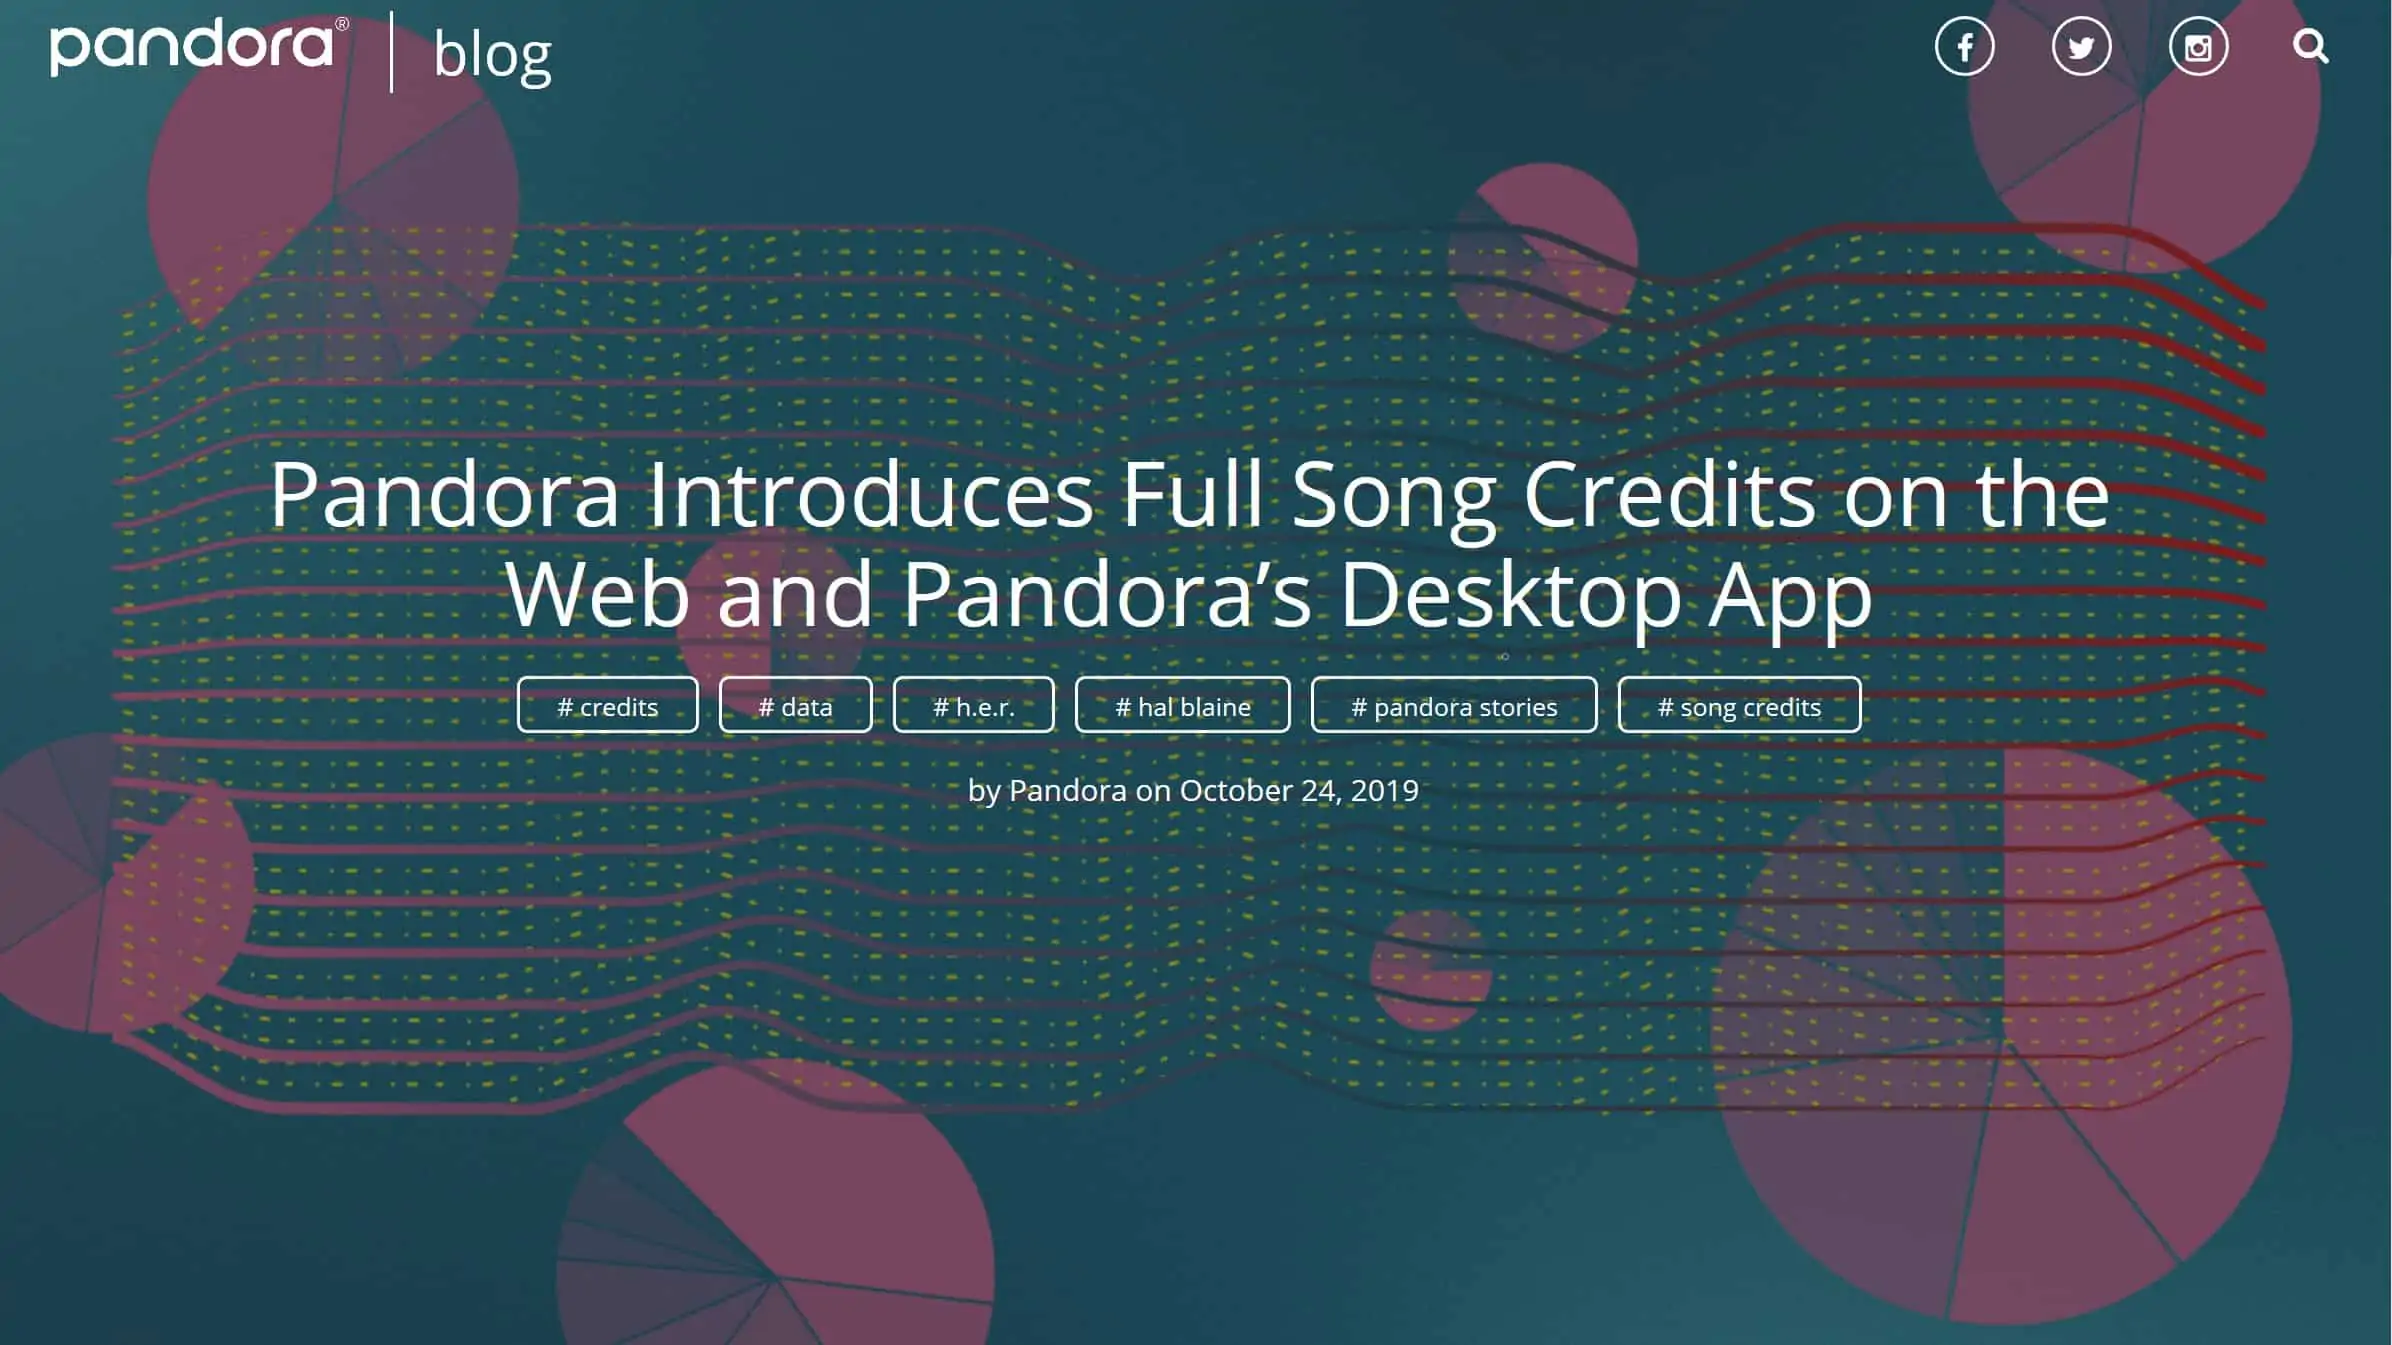 Pandora adds song credits to its web and desktop app